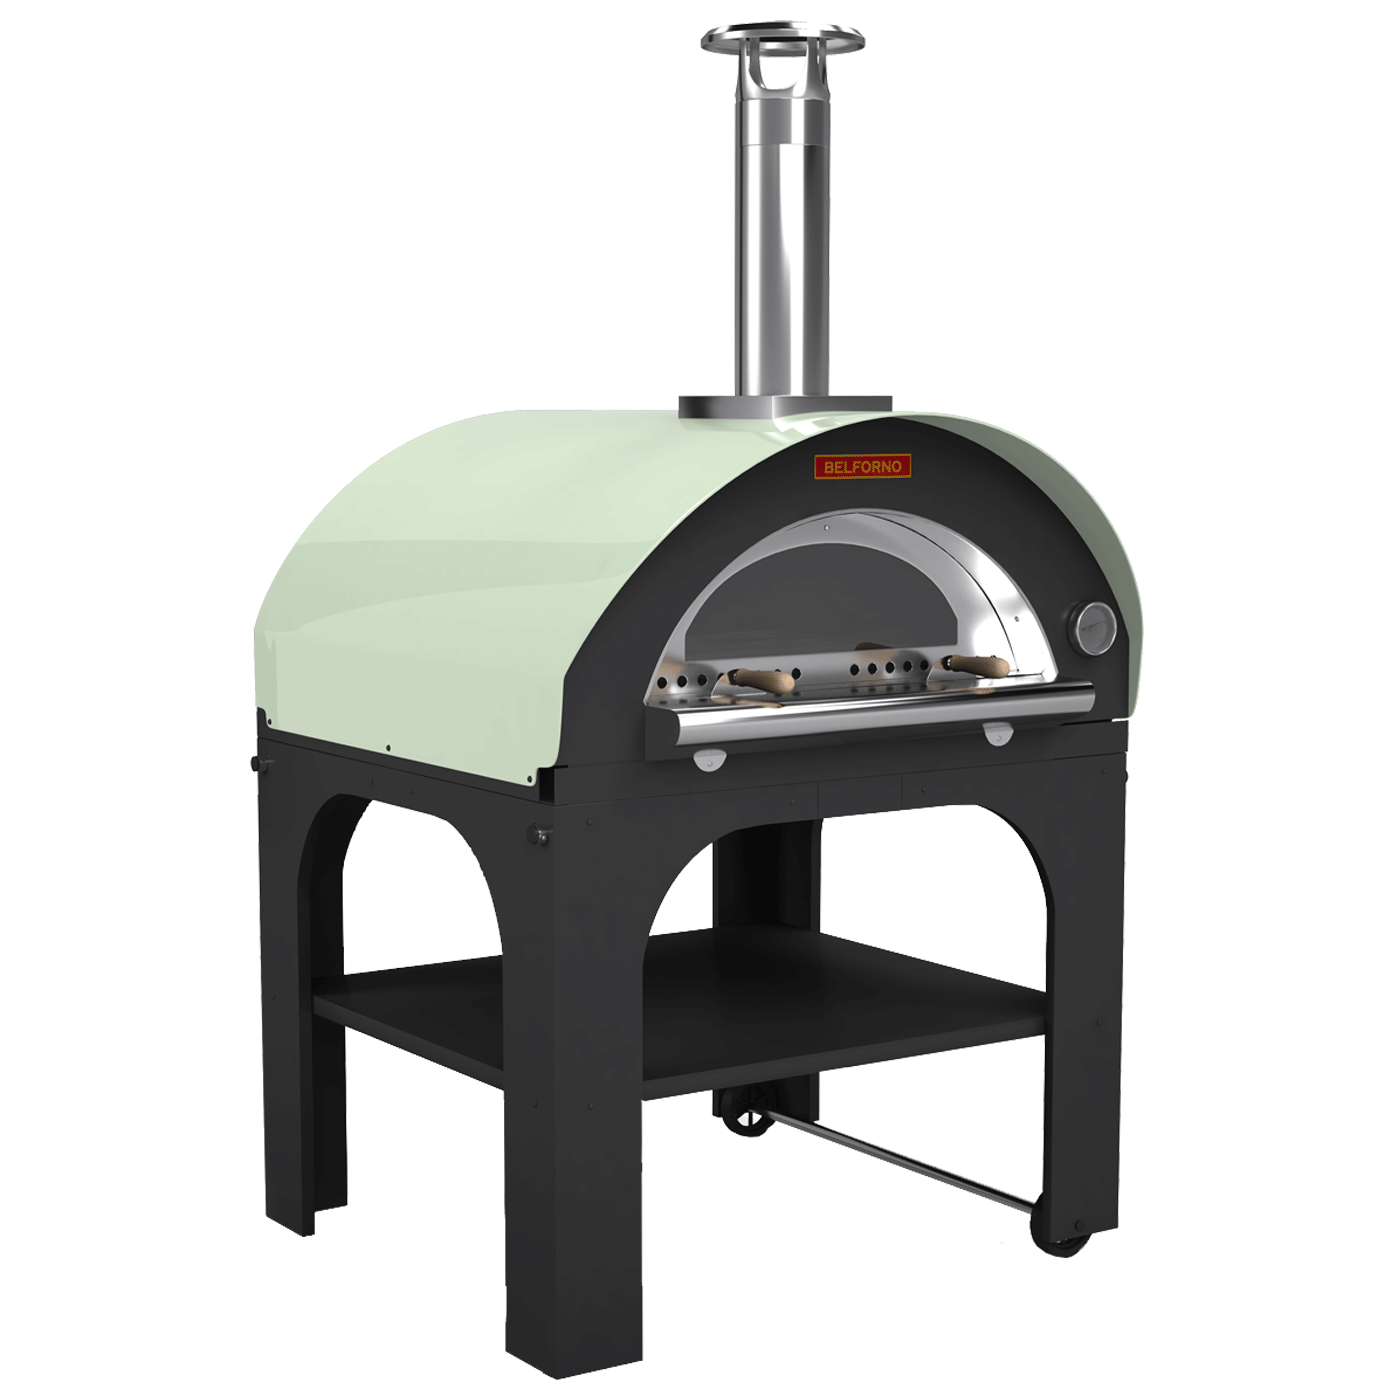 Belforno Grande Portable Wood-fired Pizza Oven - Kitchen King Direct